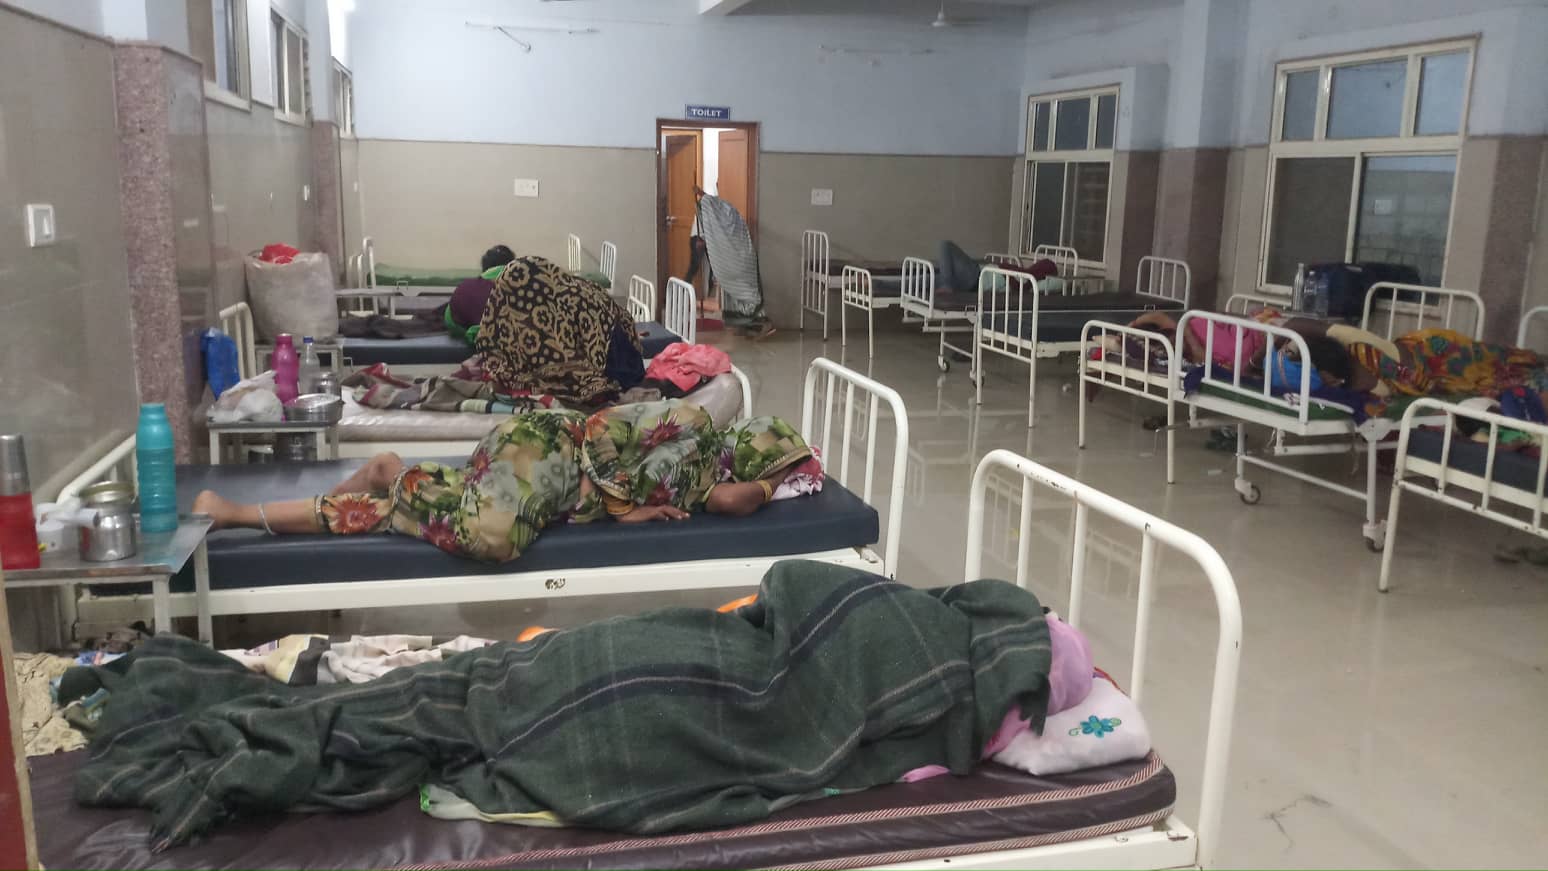 The pregnant women were sleeping on the bed, the ward filled with wat